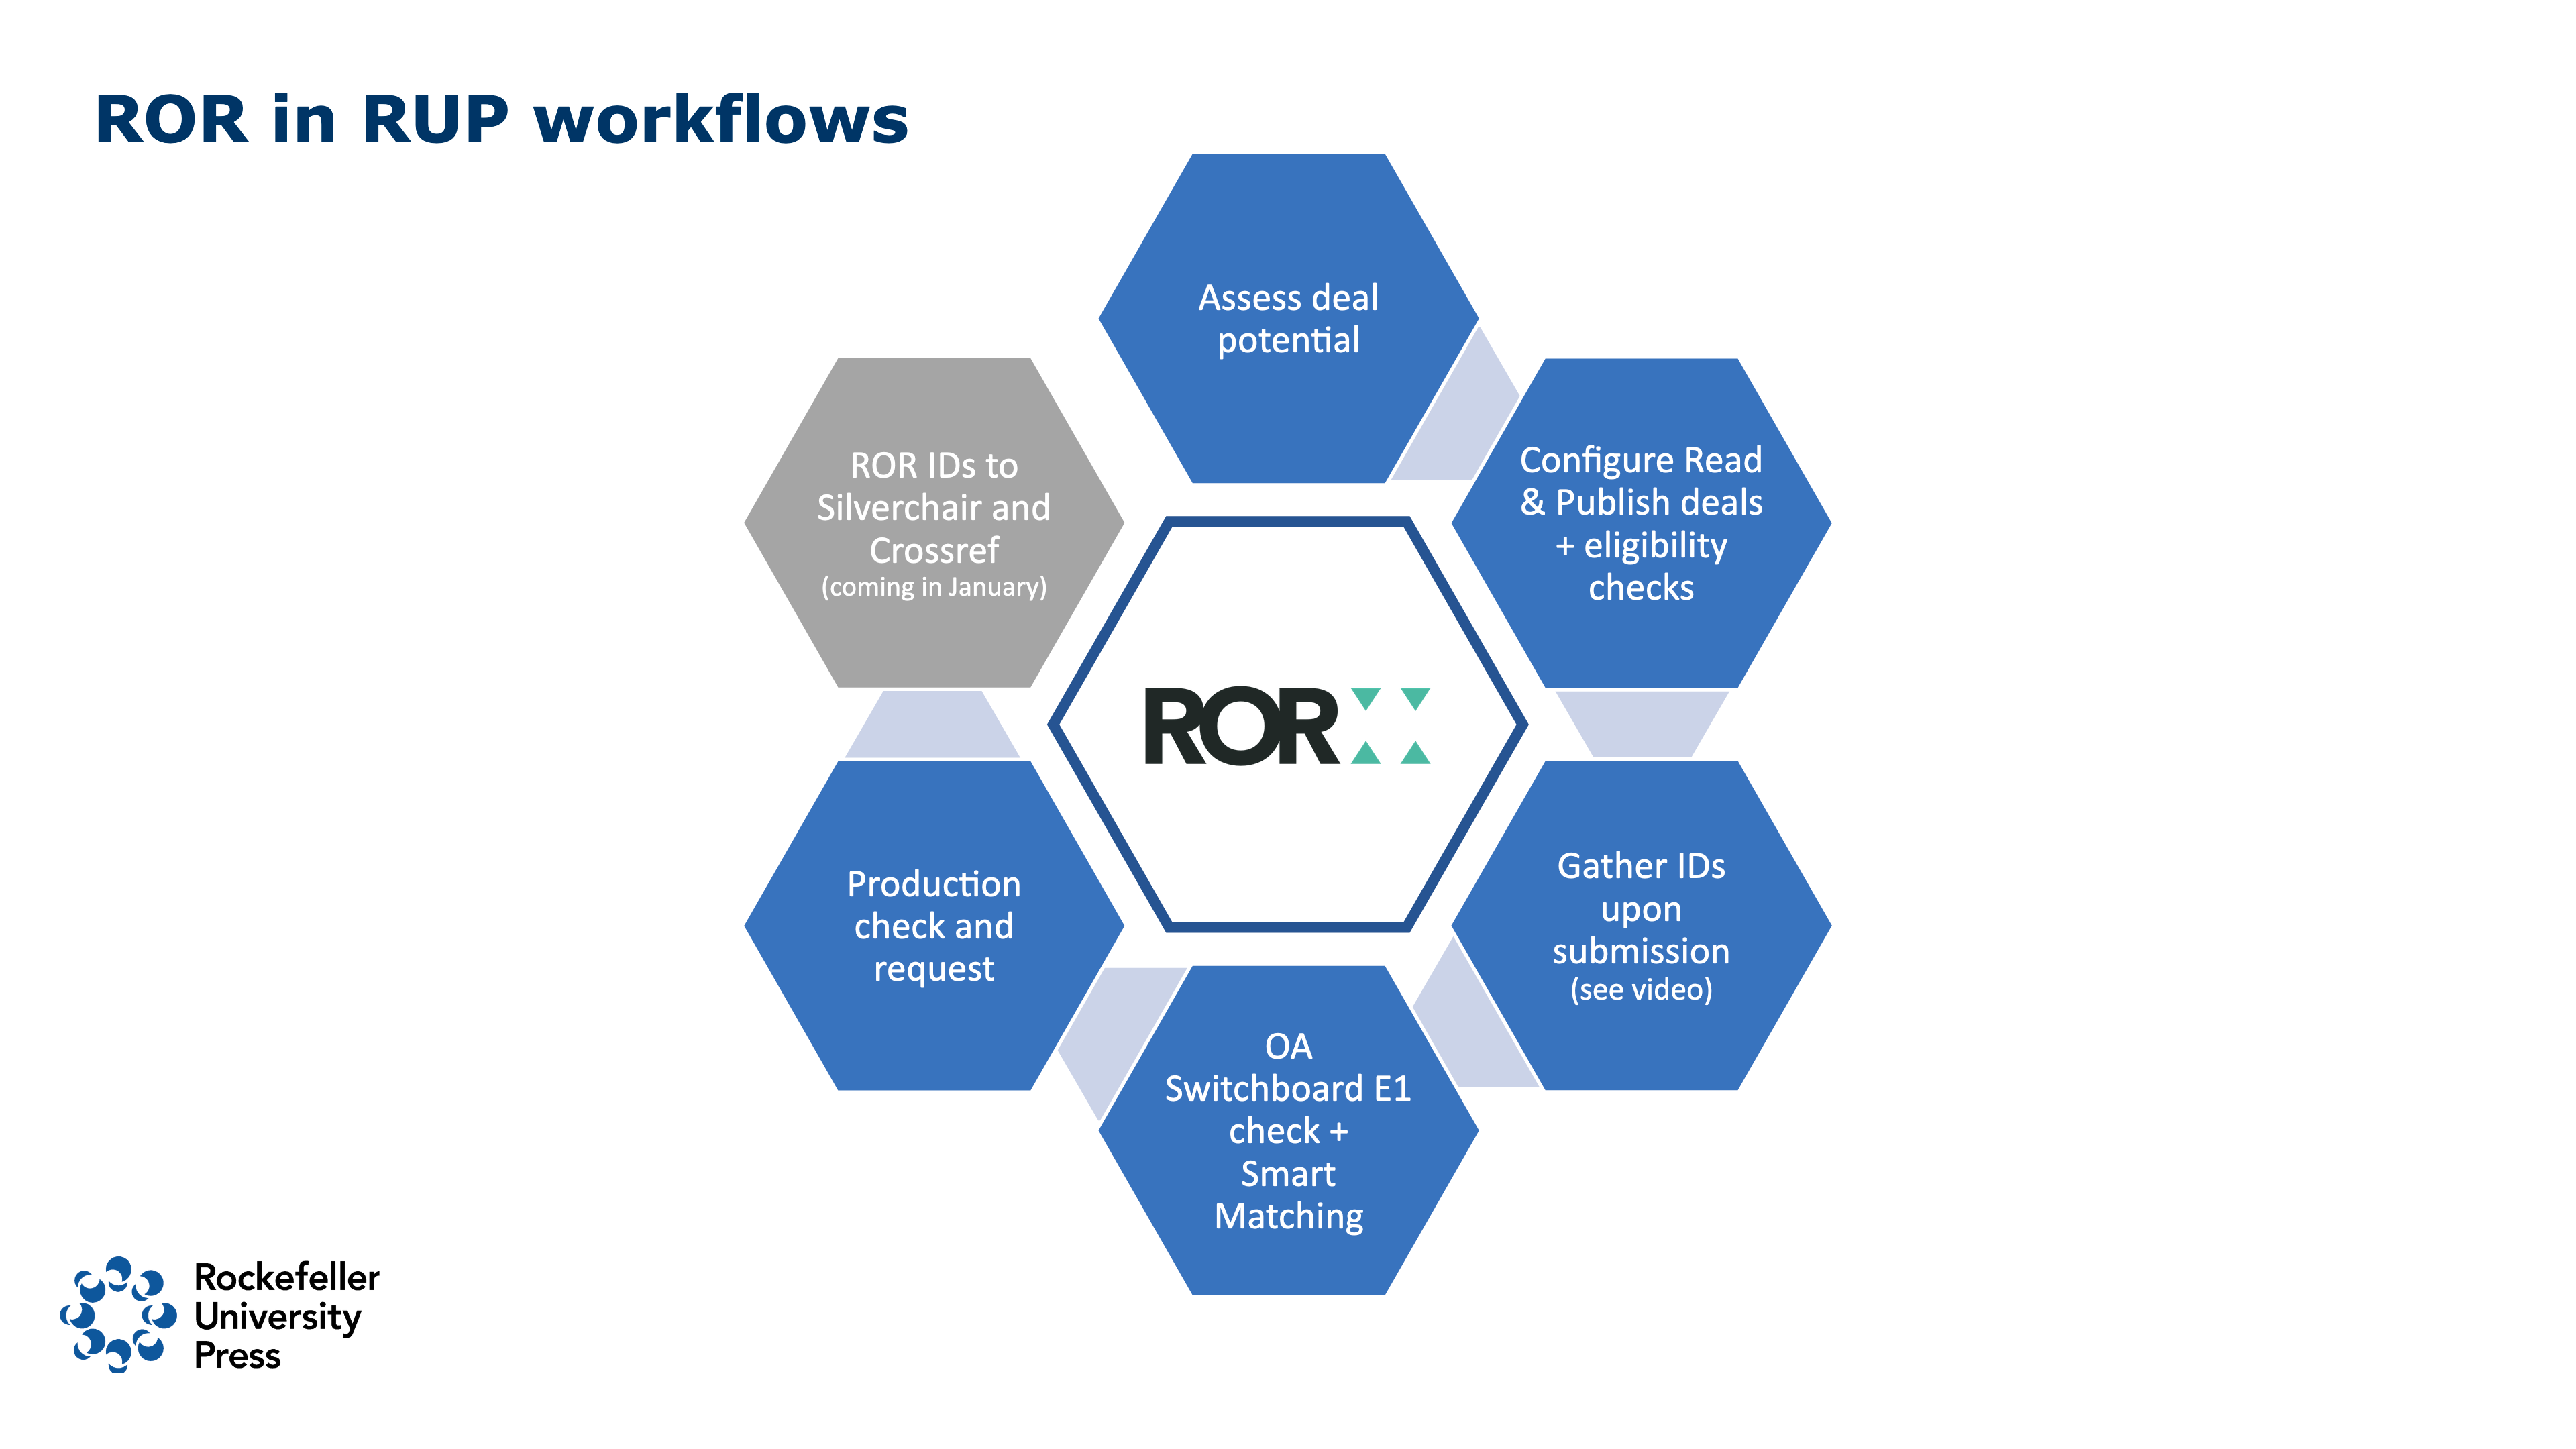 ROR in RUP workflows: assess deal potential, configure Read and Publish deals, gather ROR IDs upon submission, perform OA Switchboard E1 check, do production check, send ROR IDs to Silverchair and Crossref